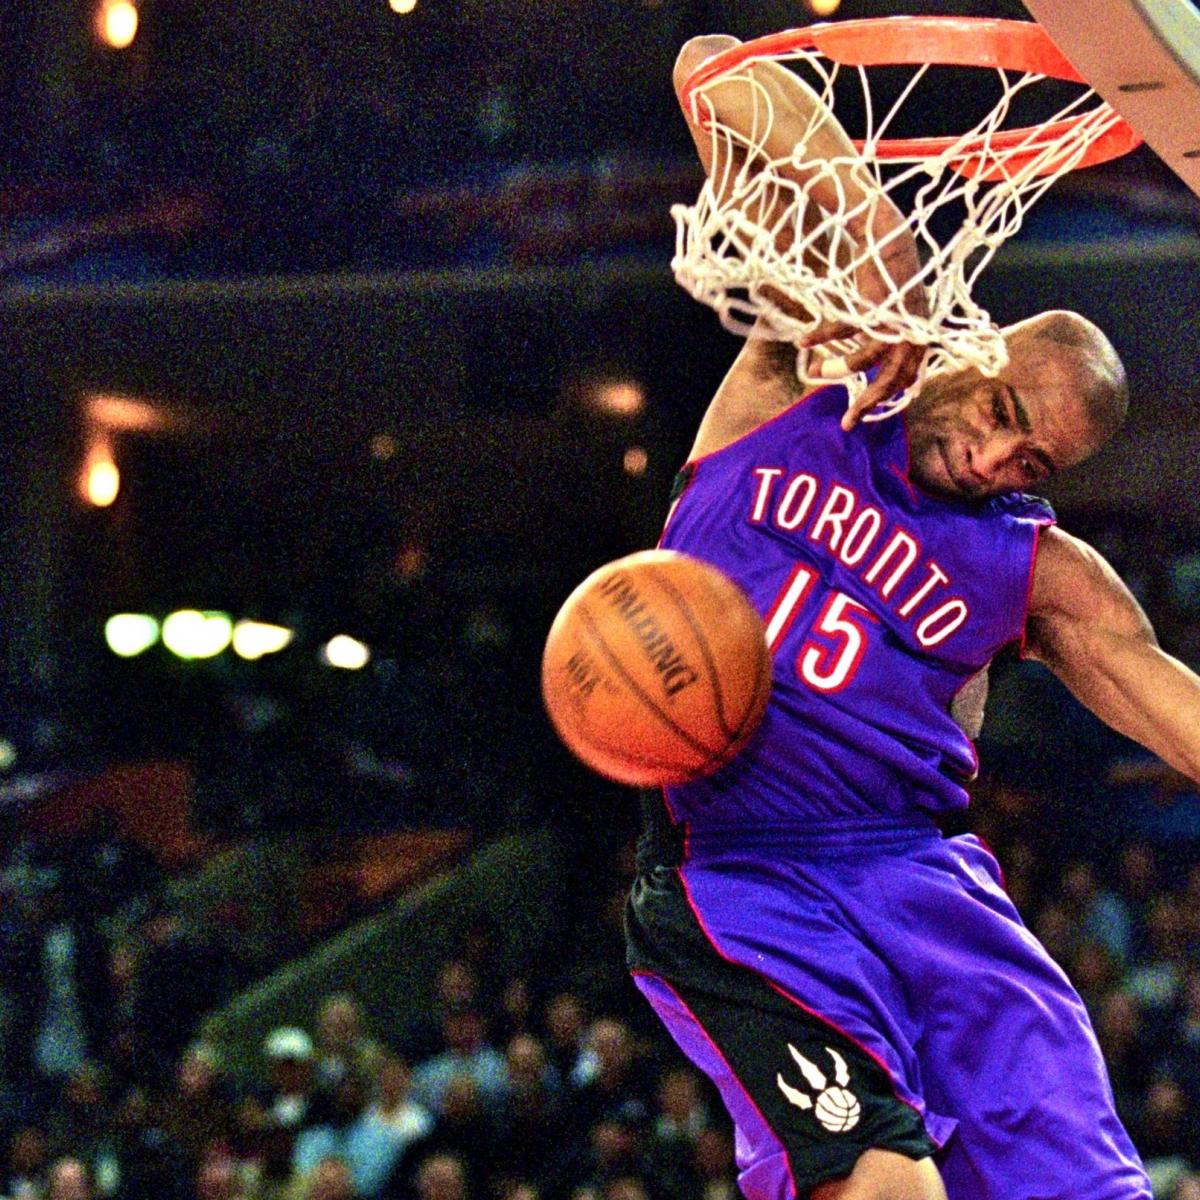 Watch: Vince Carter throws down two incredible dunks, on this day 22 years  ago